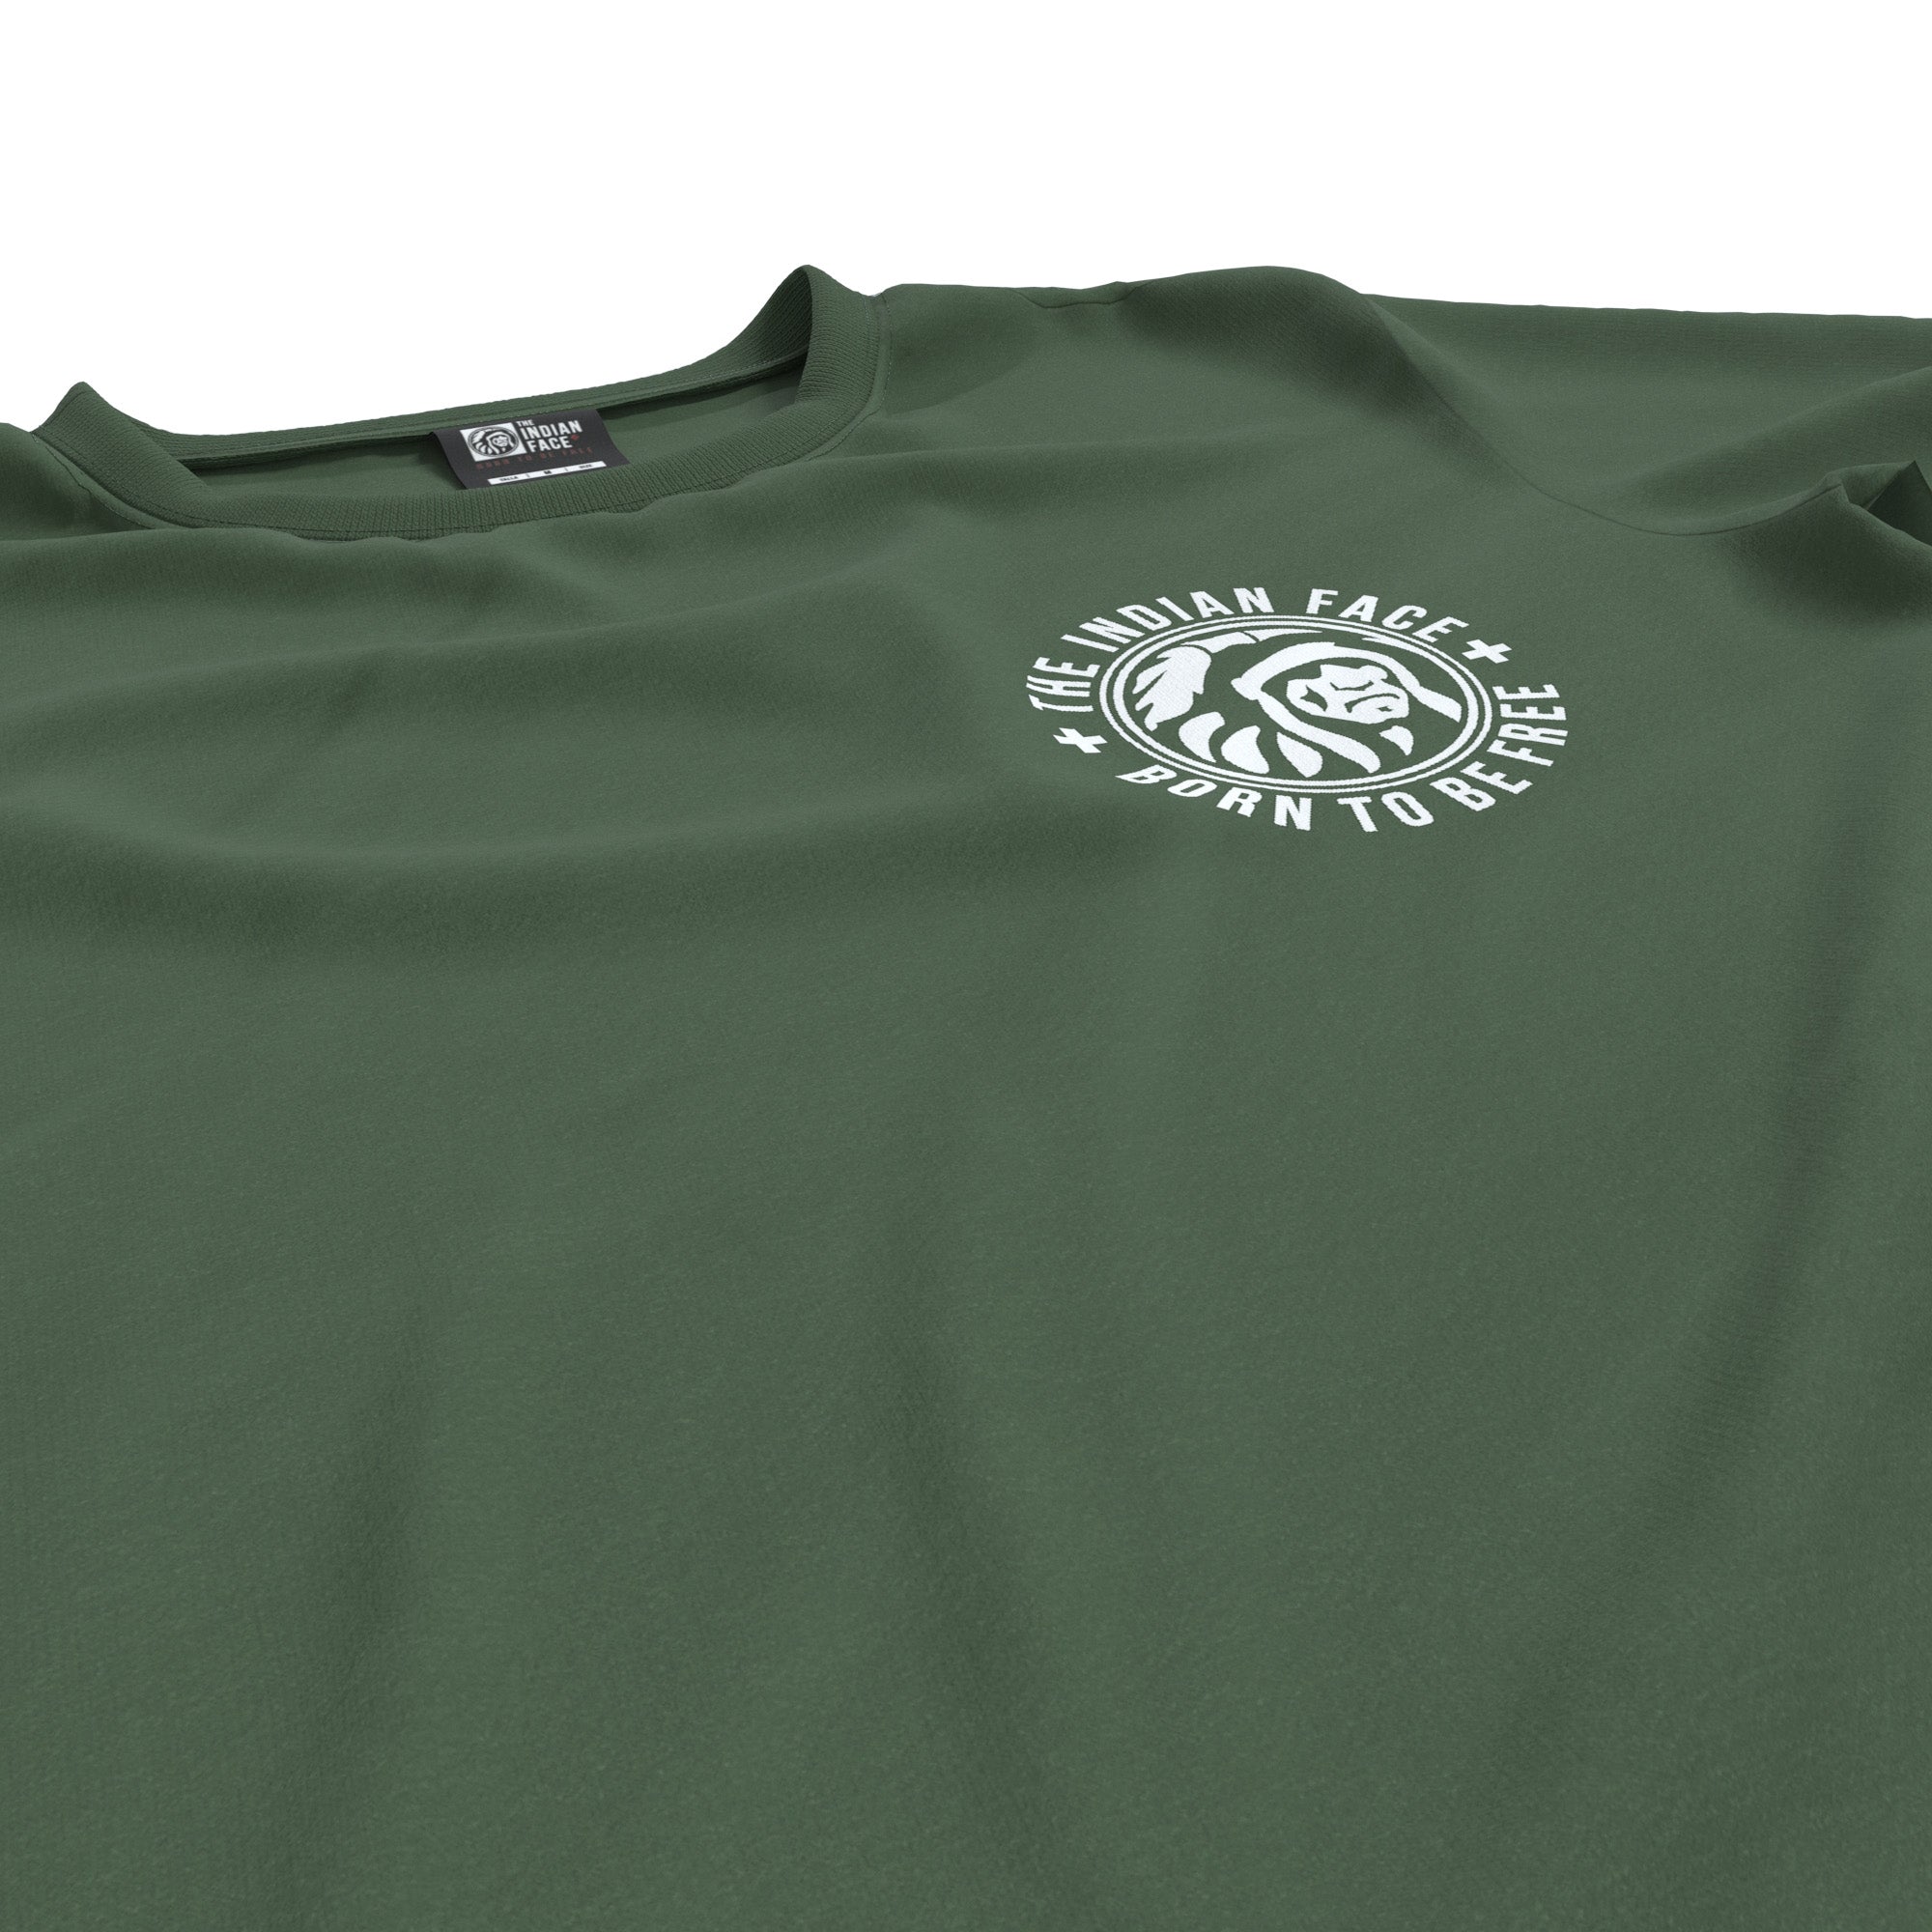 Camiseta The Indian Face Iconic - Verde  MKP